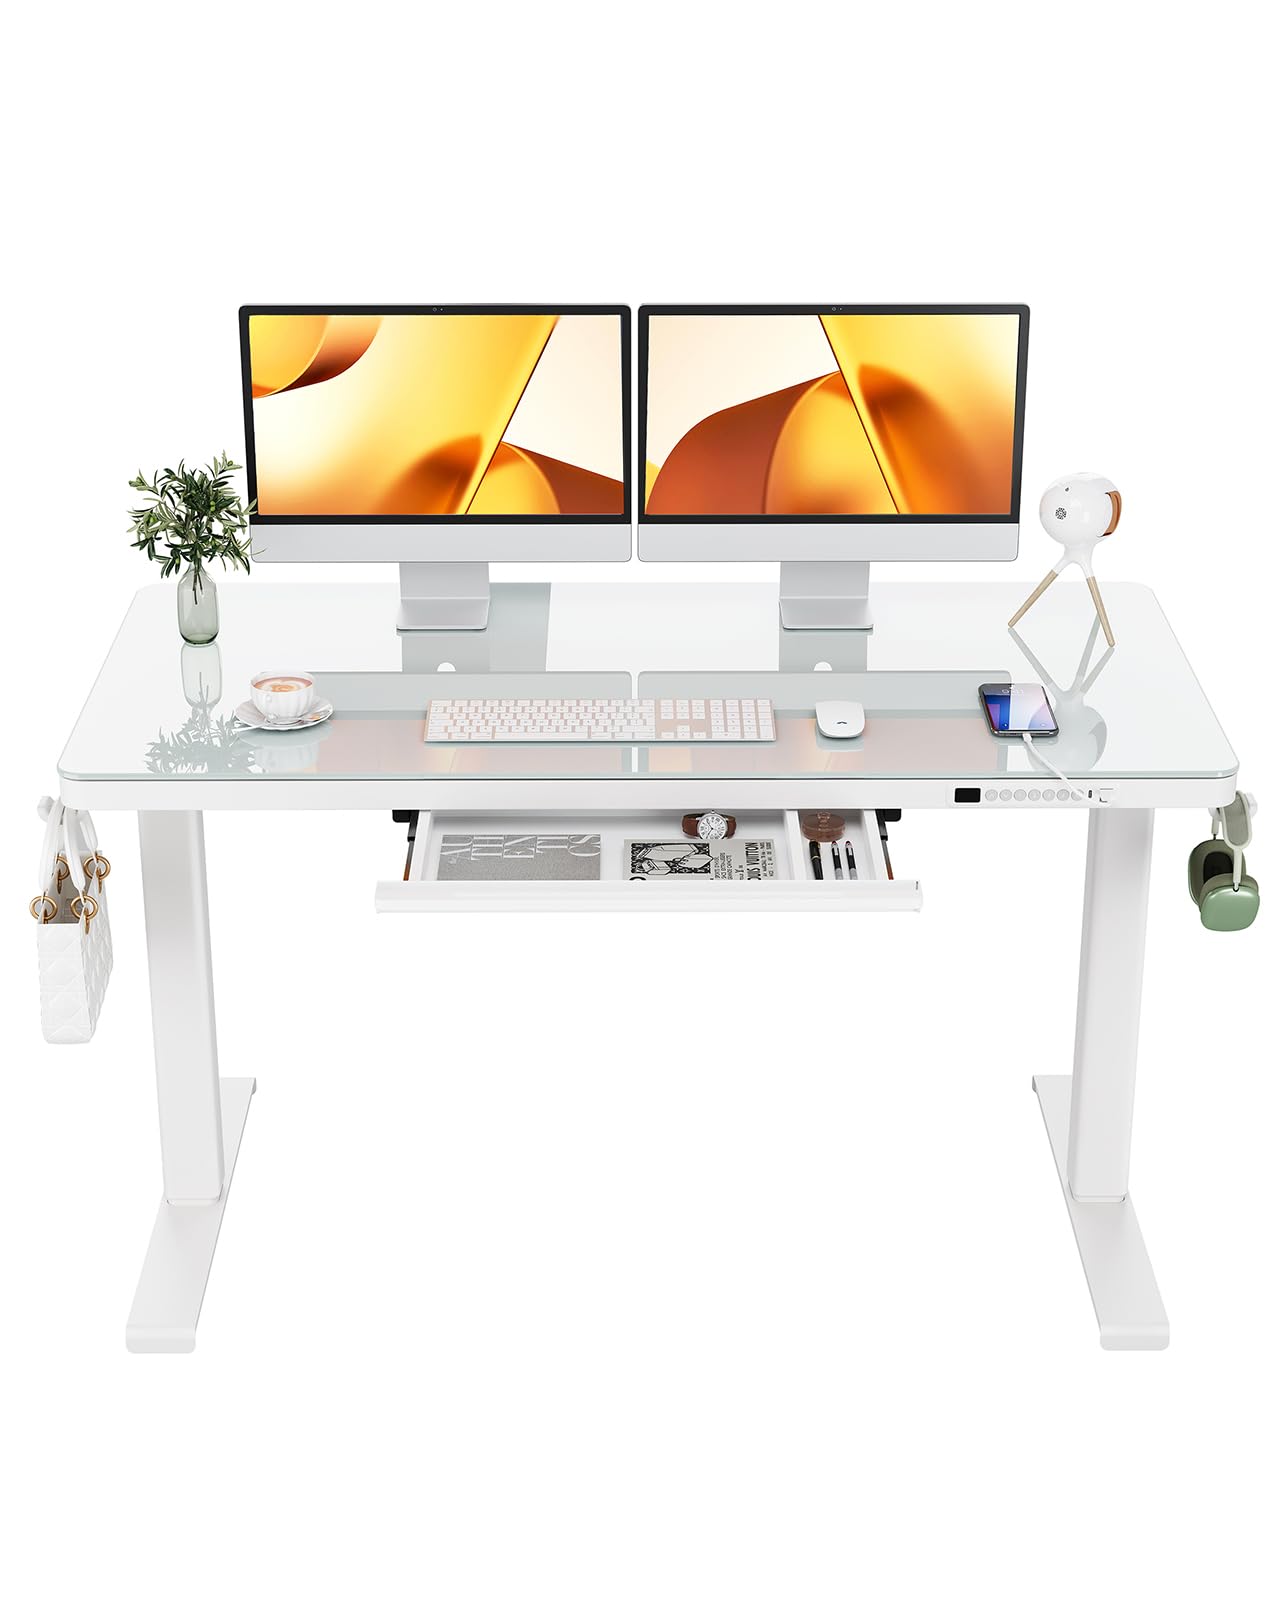 ErGear Dual Motor Electric Standing Desk with Drawers,48x24 Inch Whole-Piece Glass Desktop Quick Install,Height Adjustable Stand up Sit Stand Home Office Ergonomic Workstation with USB Charging Ports